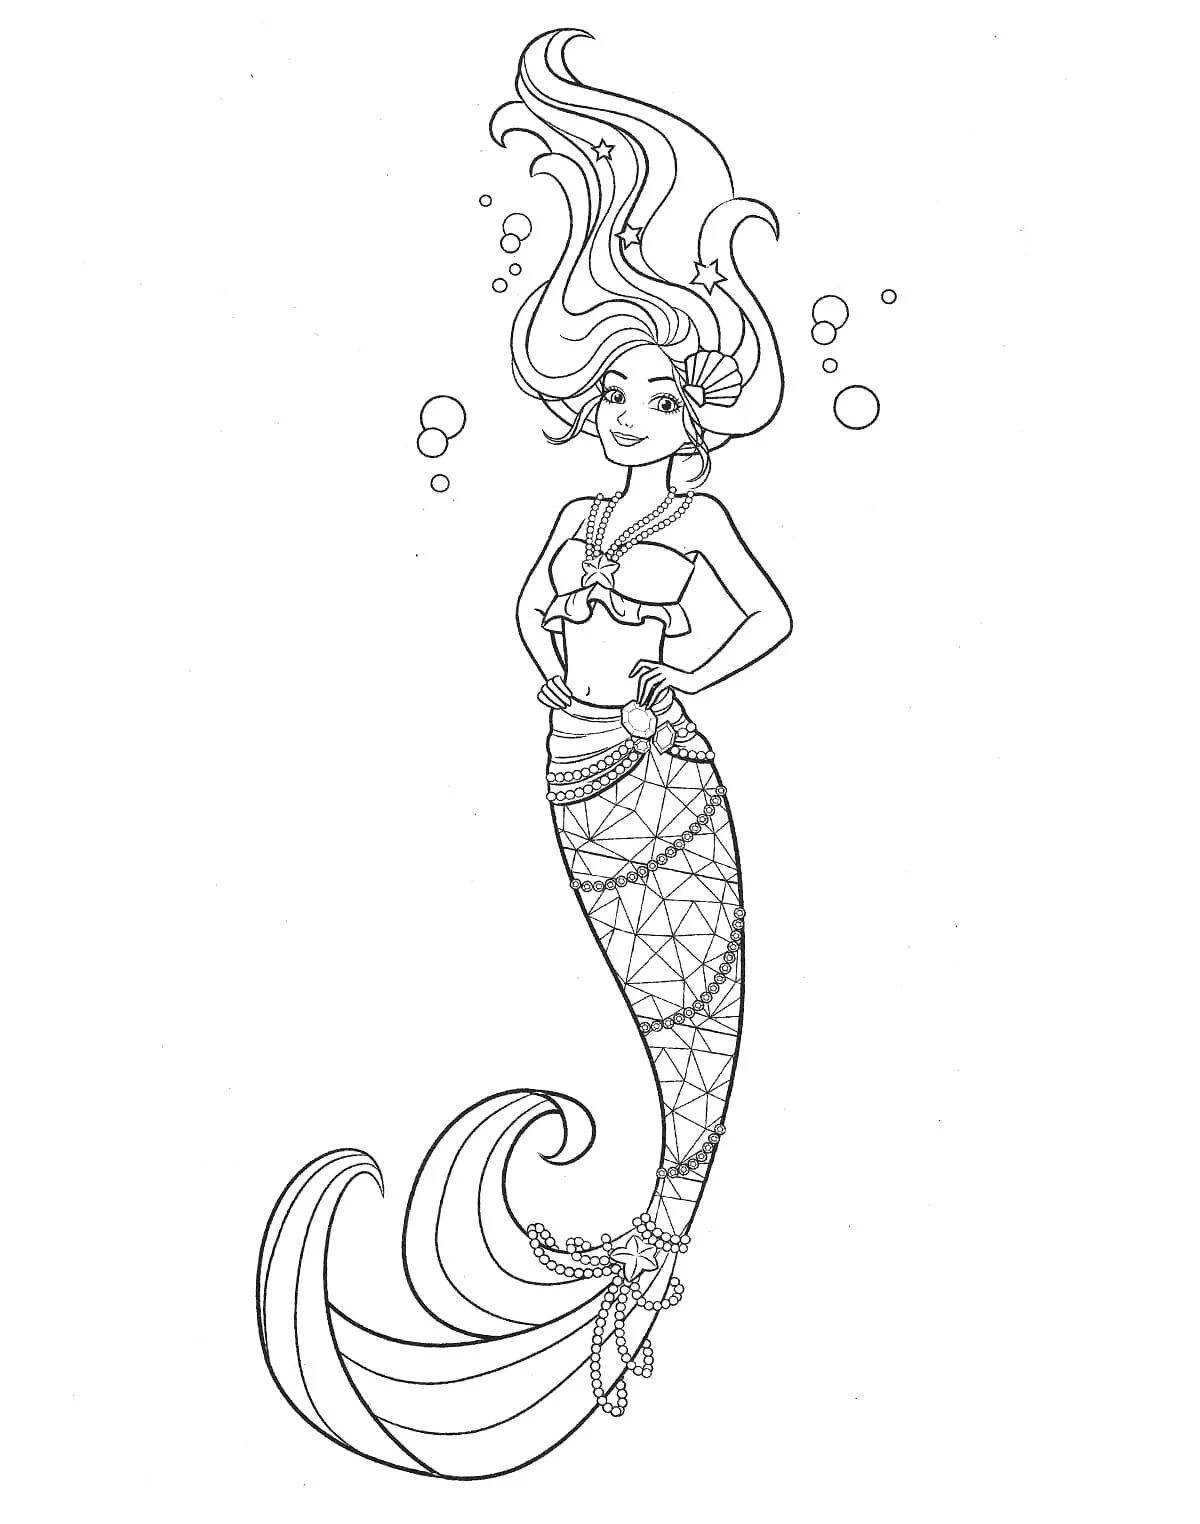 Animated barbie mermaid coloring book for kids